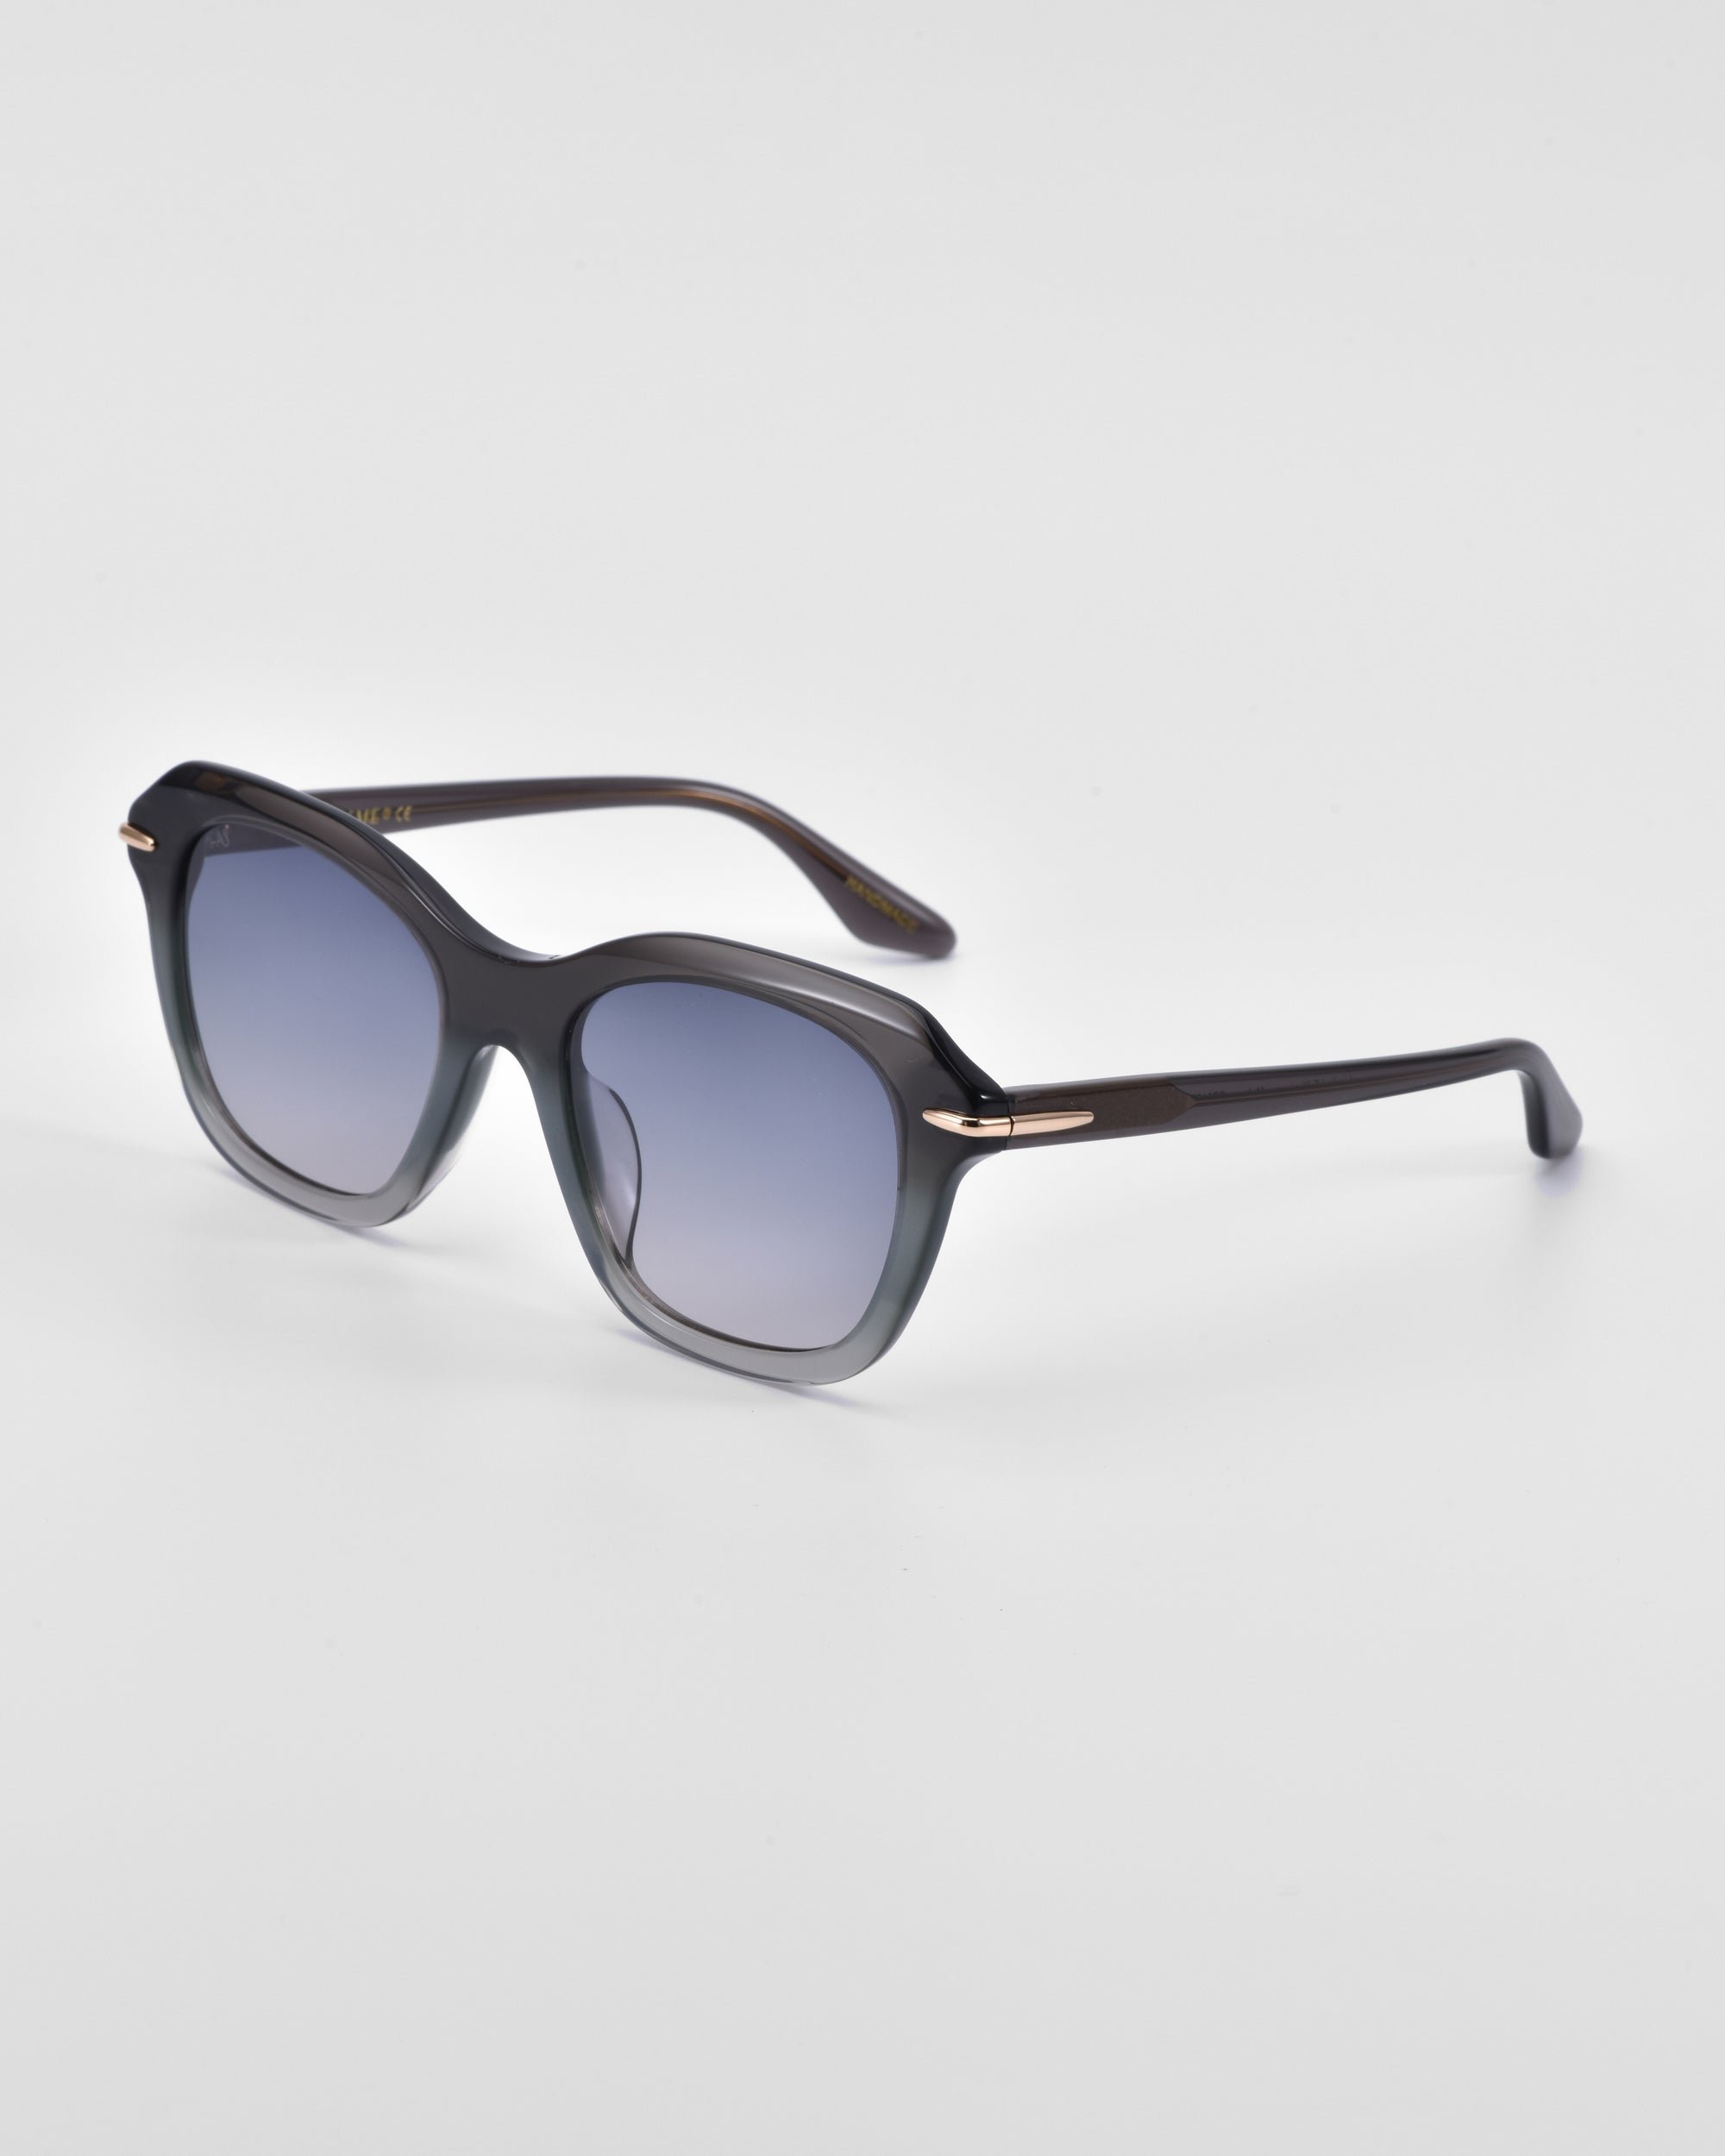 A pair of stylish Helene sunglasses by For Art&#39;s Sake® featuring large, square-shaped dark lenses and sleek, dark frames with a subtle metallic accent on the temples. The Helene sunglasses by For Art&#39;s Sake® are angled slightly to showcase both the front and side profiles against a plain white background, making them a true statement piece.